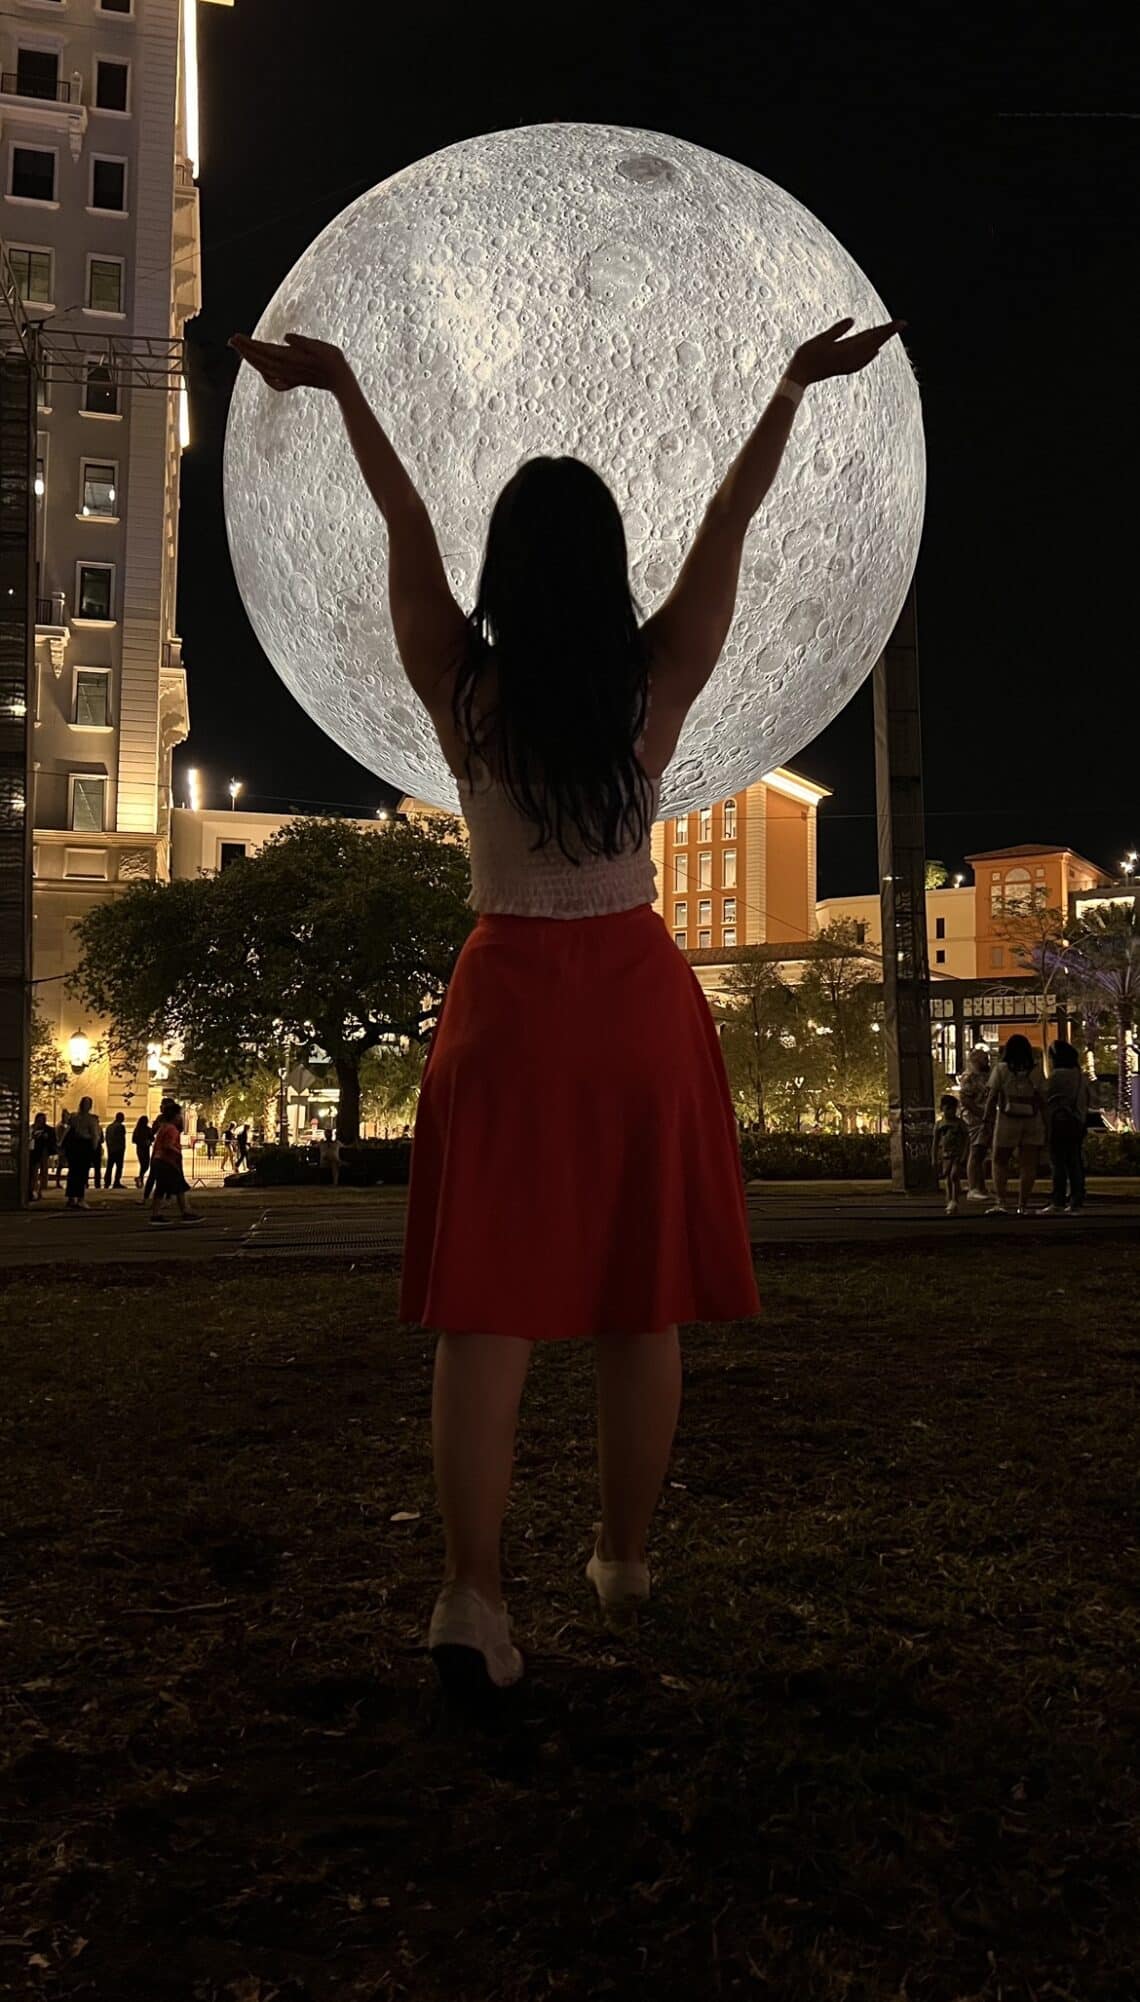 Moon Over The Gables Public Art Installation in Coral Gables